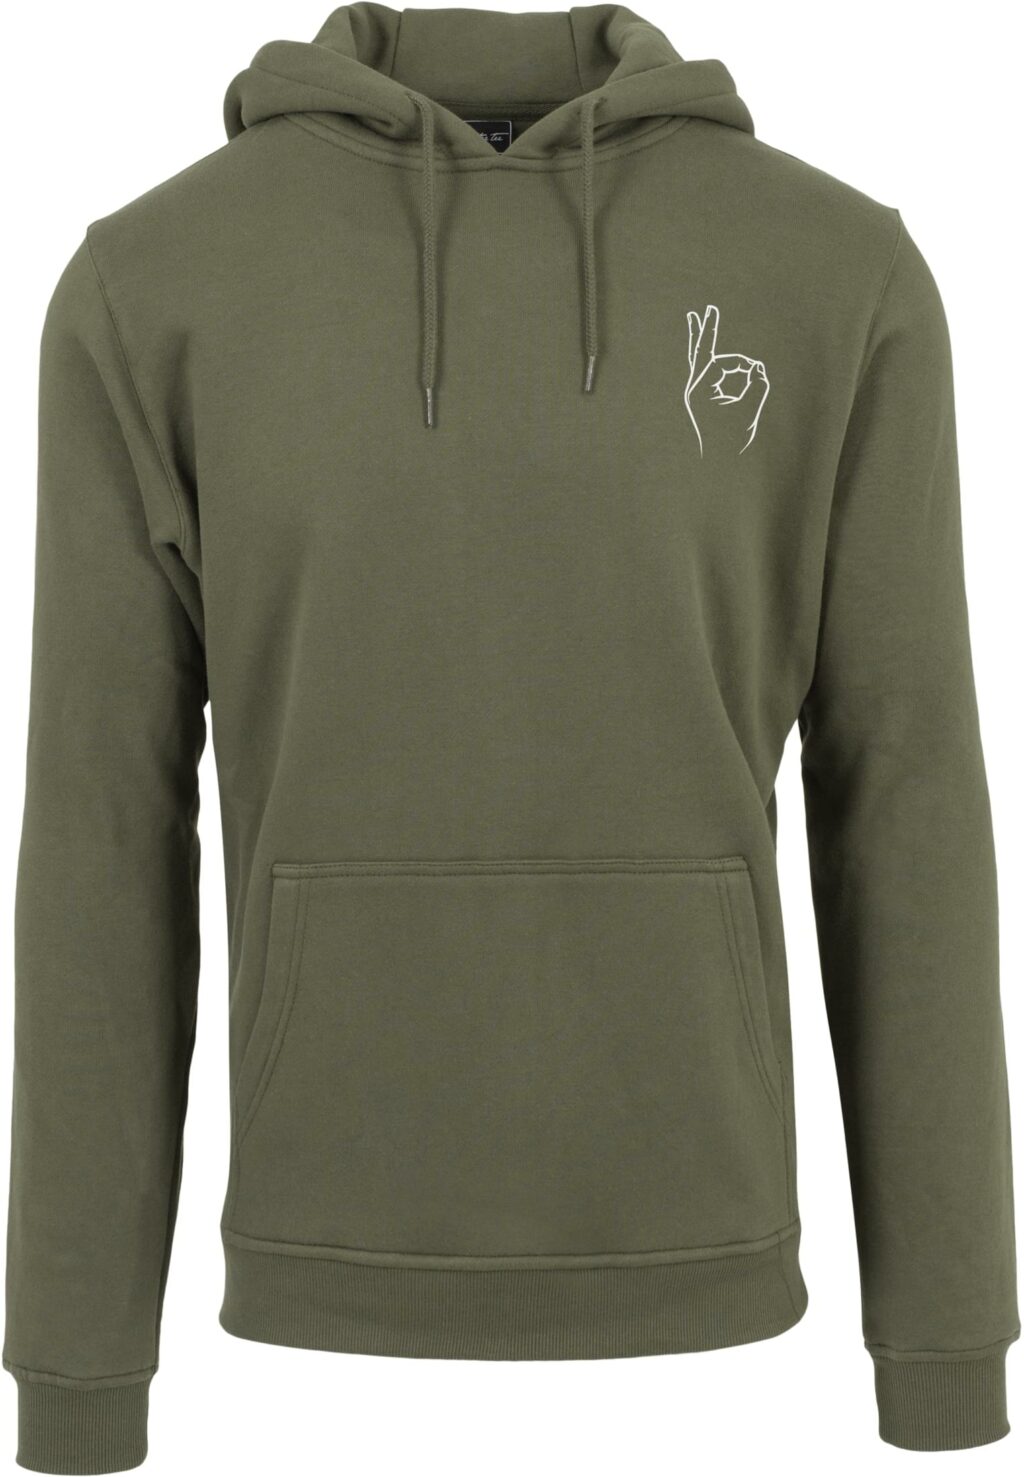 Easy Sign Hoody  olive MT2562